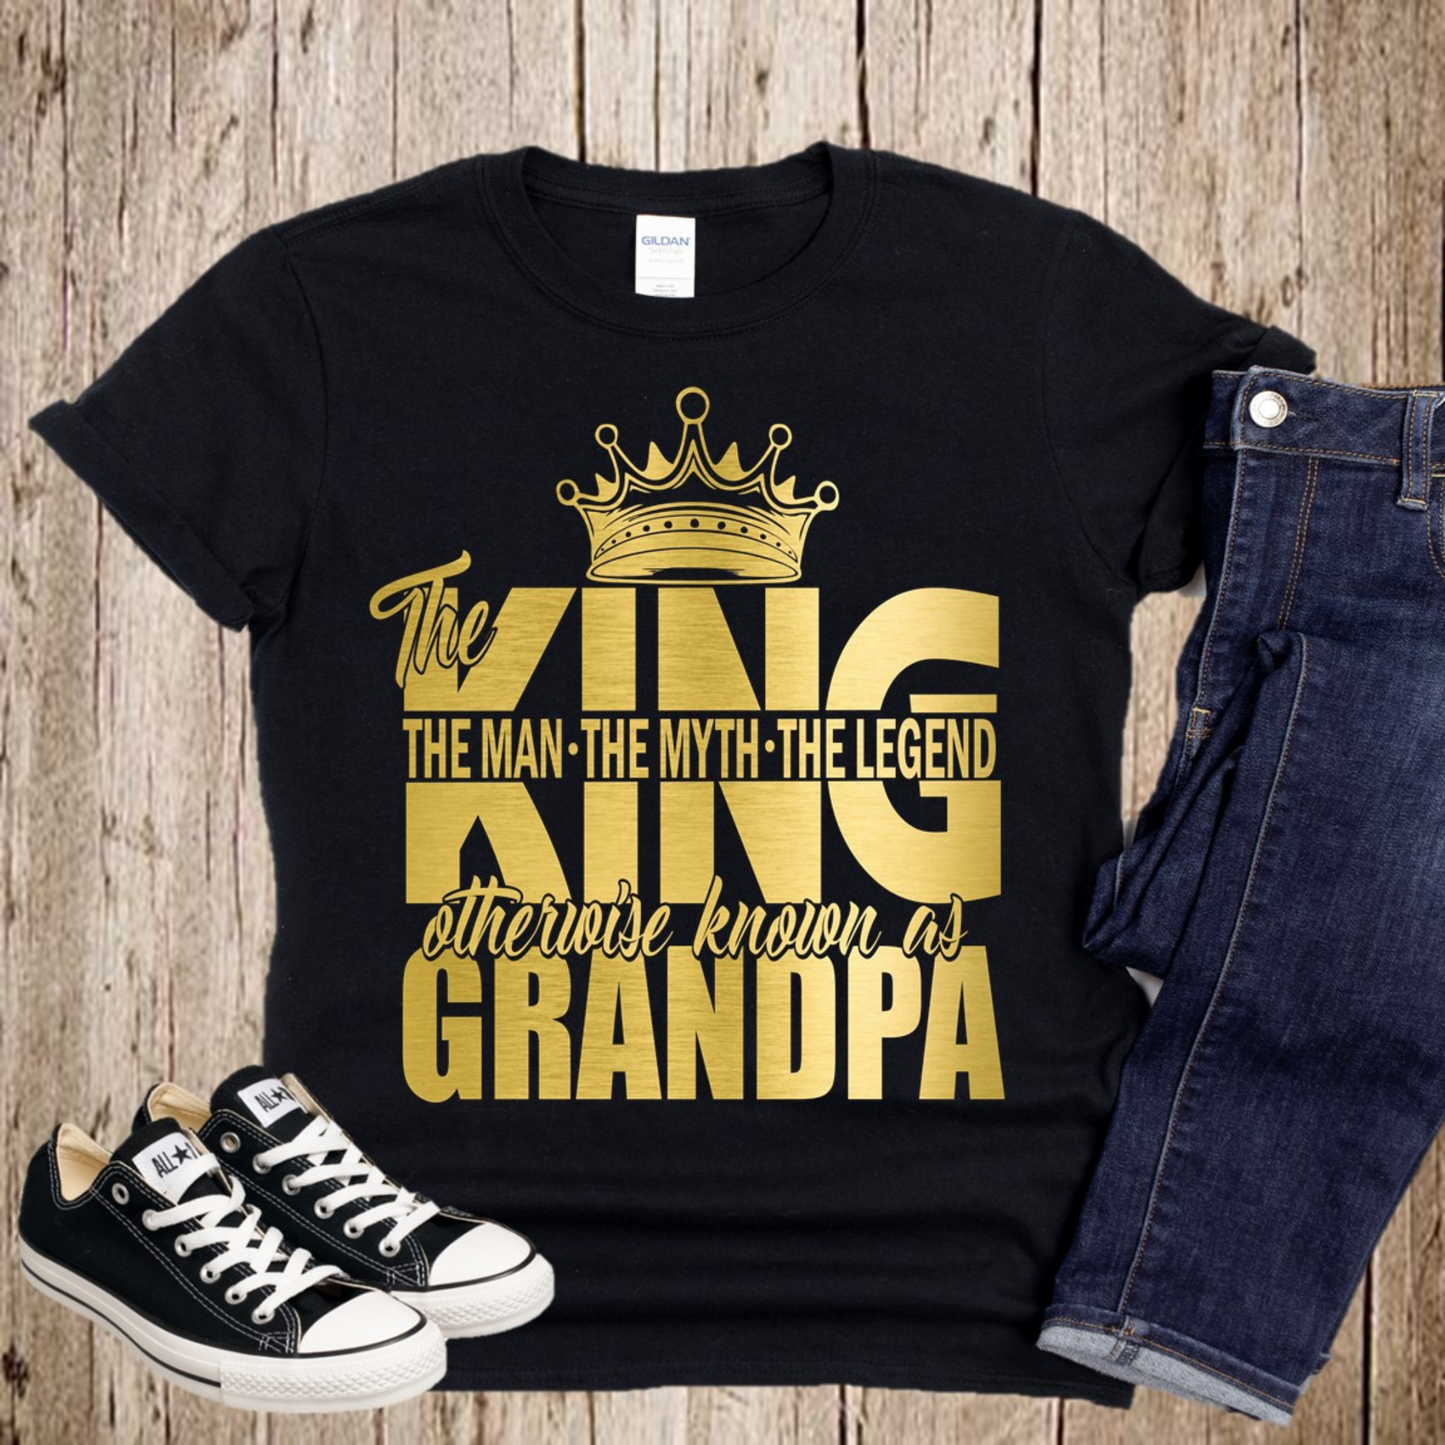 King otherwise known as Grandpa